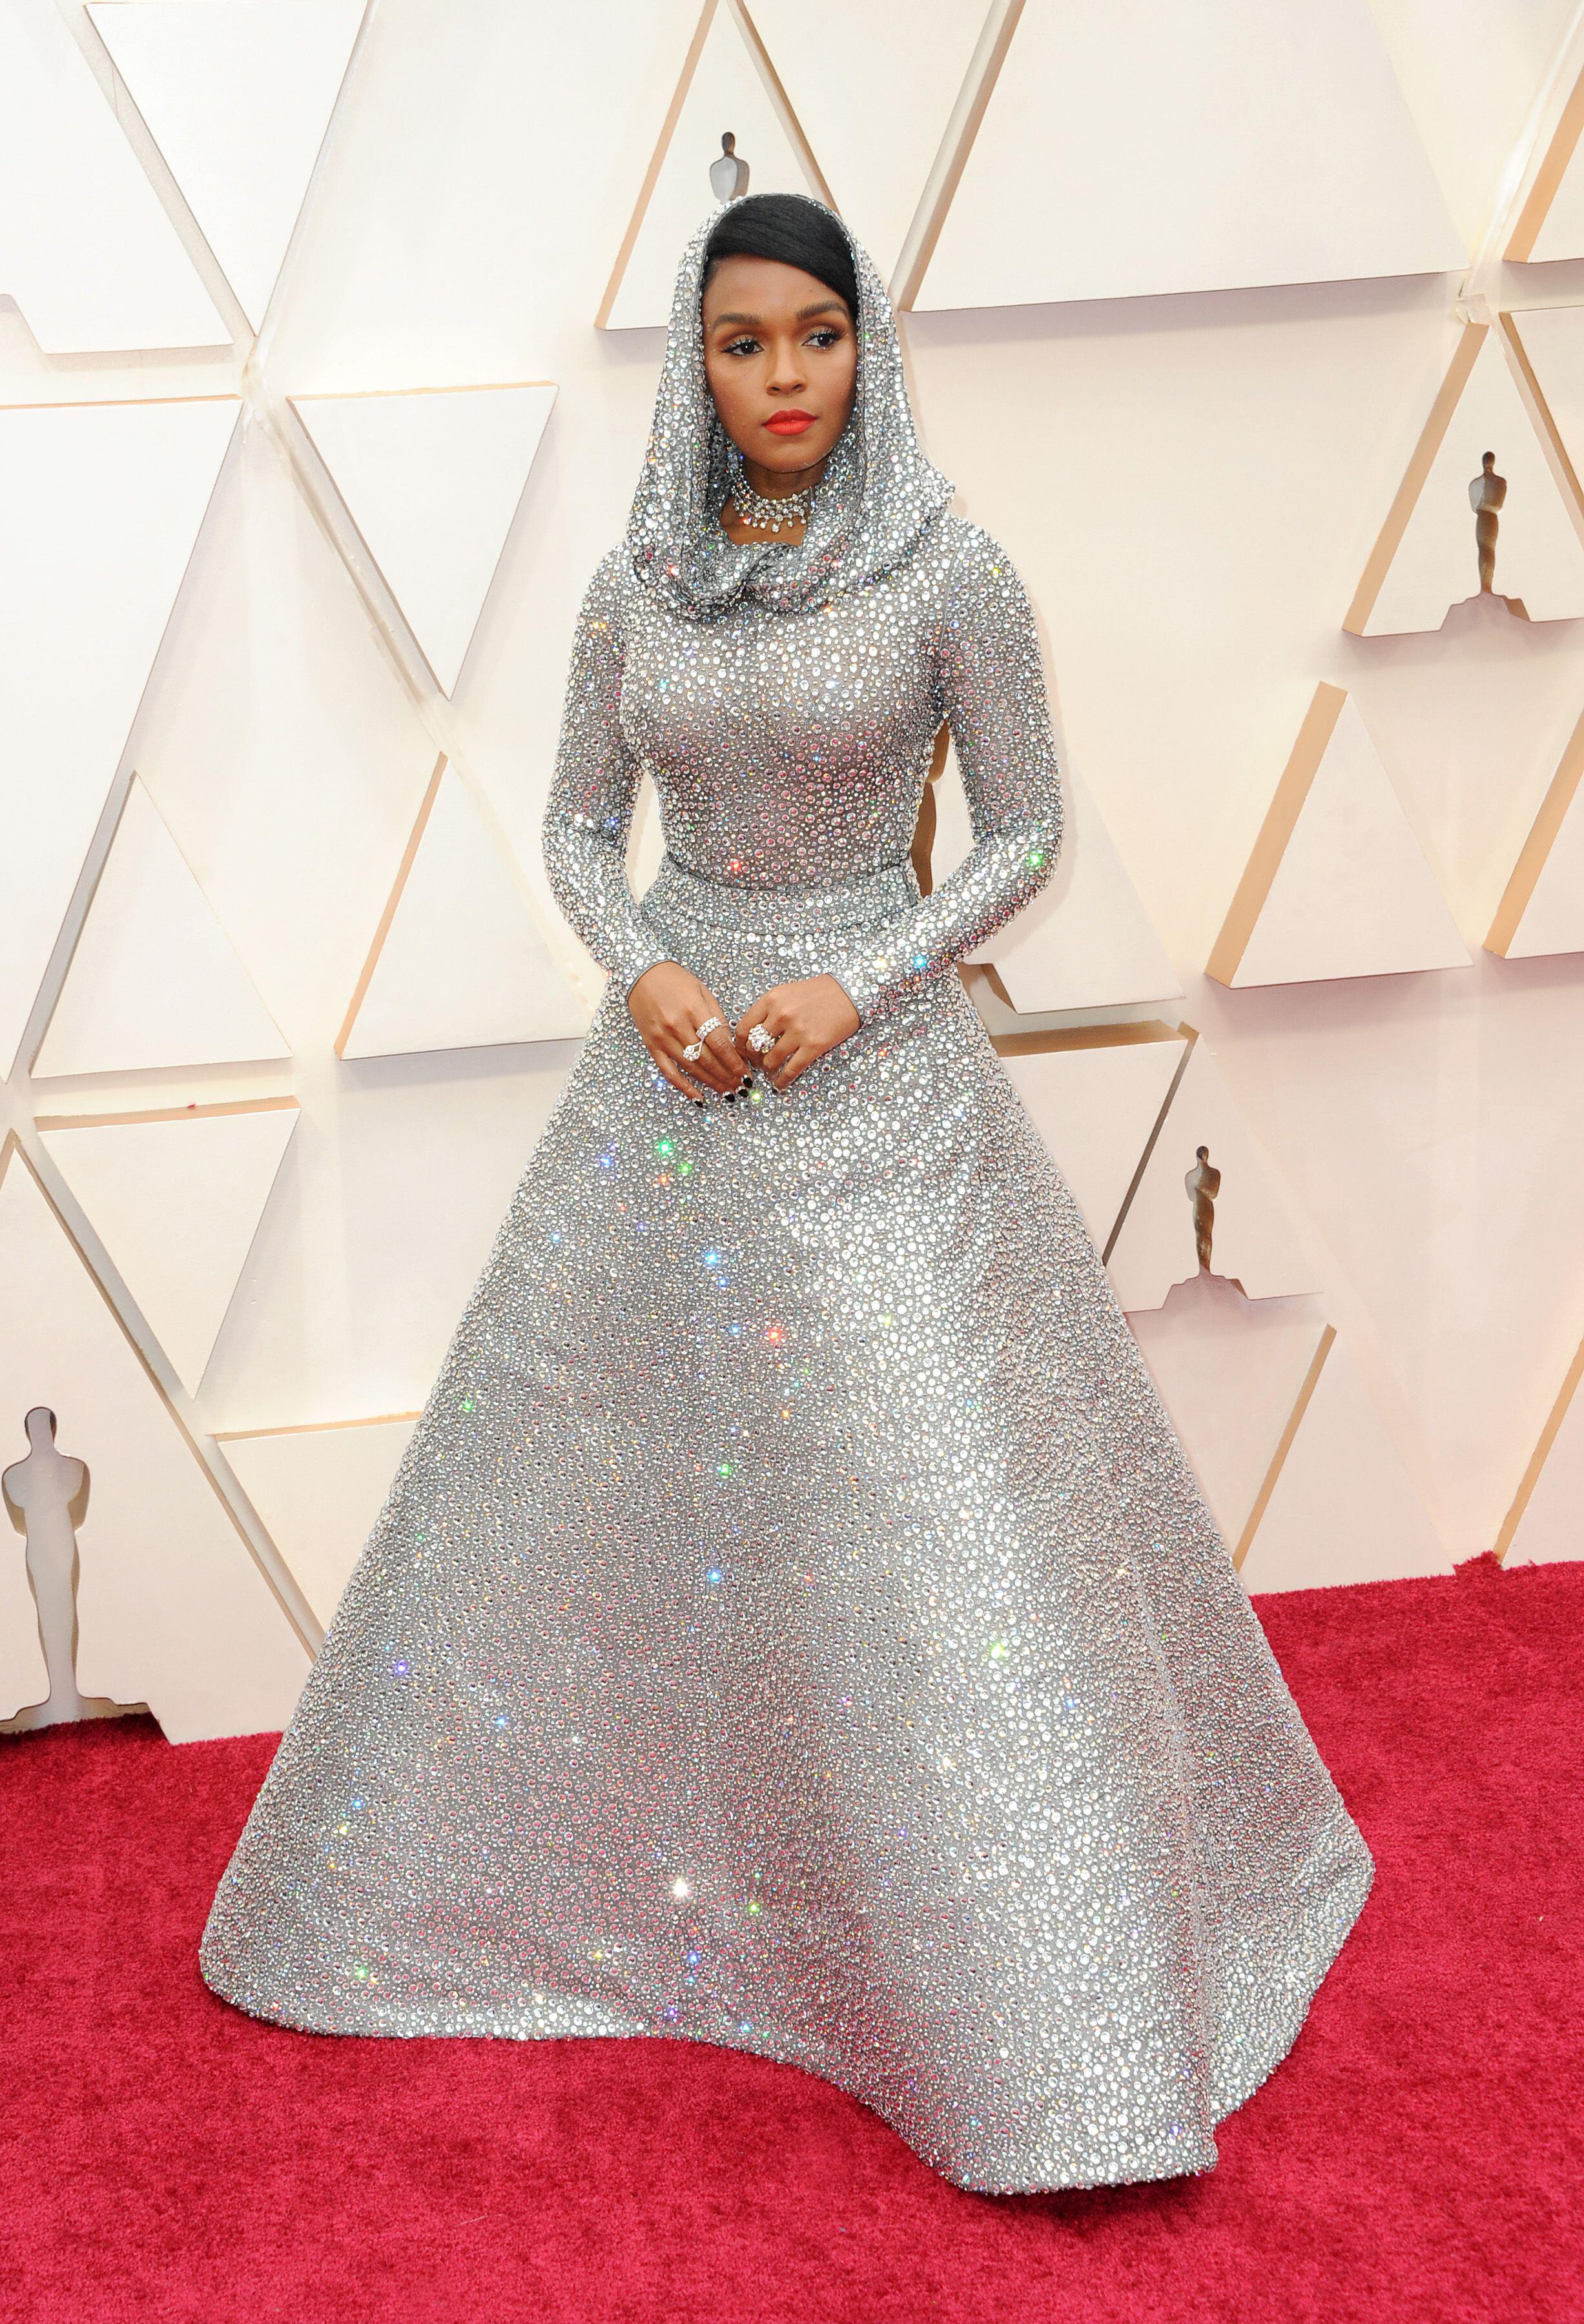 Photos: Red carpet fashion at the Oscars